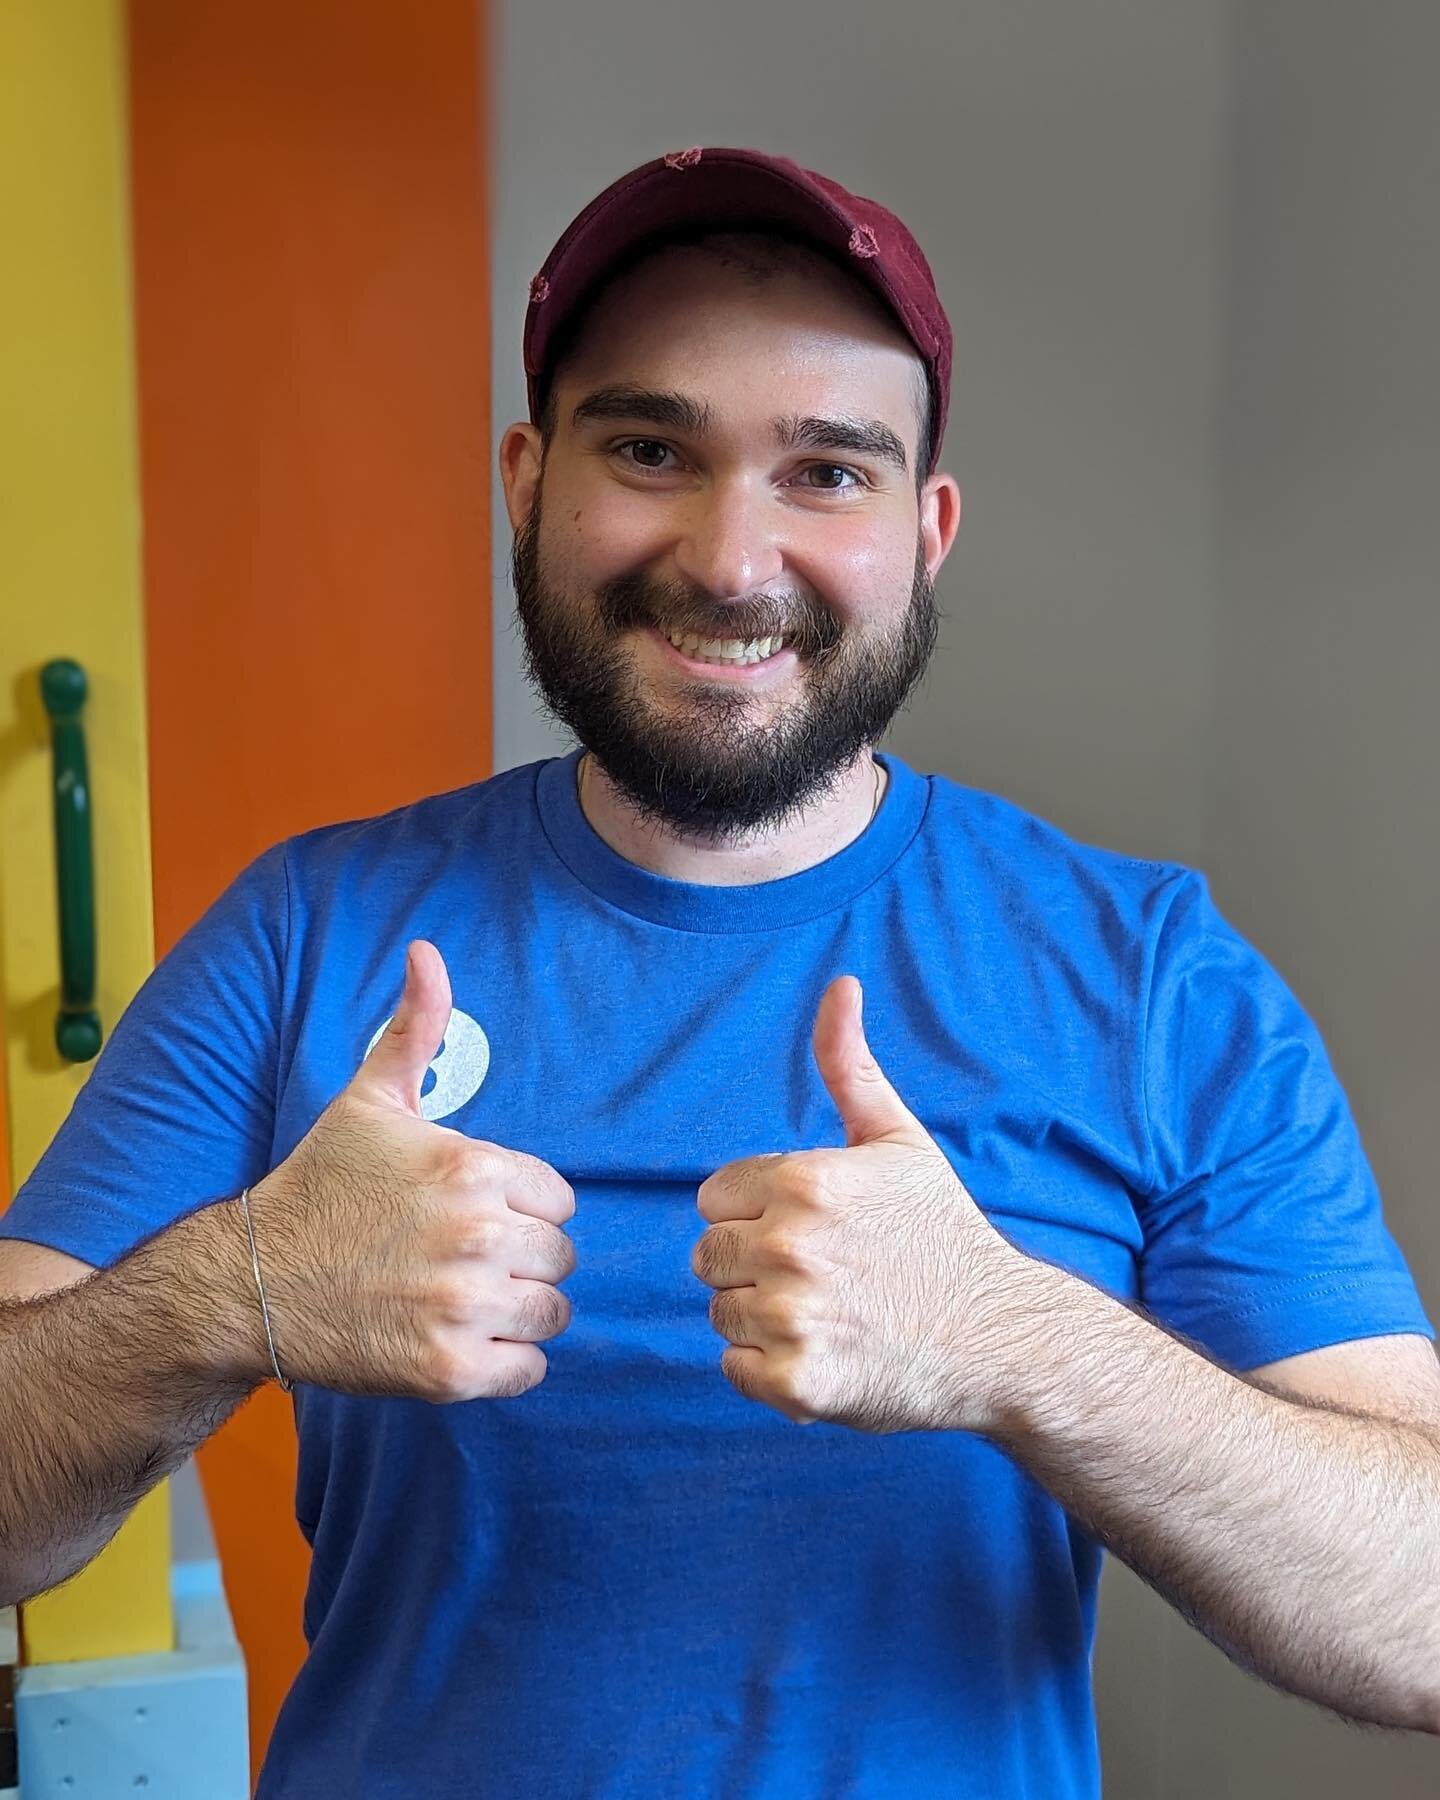 One of our Downtown team members has recently received his Tier 2 promotion! Paul has been instrumental at TBP providing smiles to both staff and clients. He runs his sessions like a well organized marching band. We are all super proud of his accompl